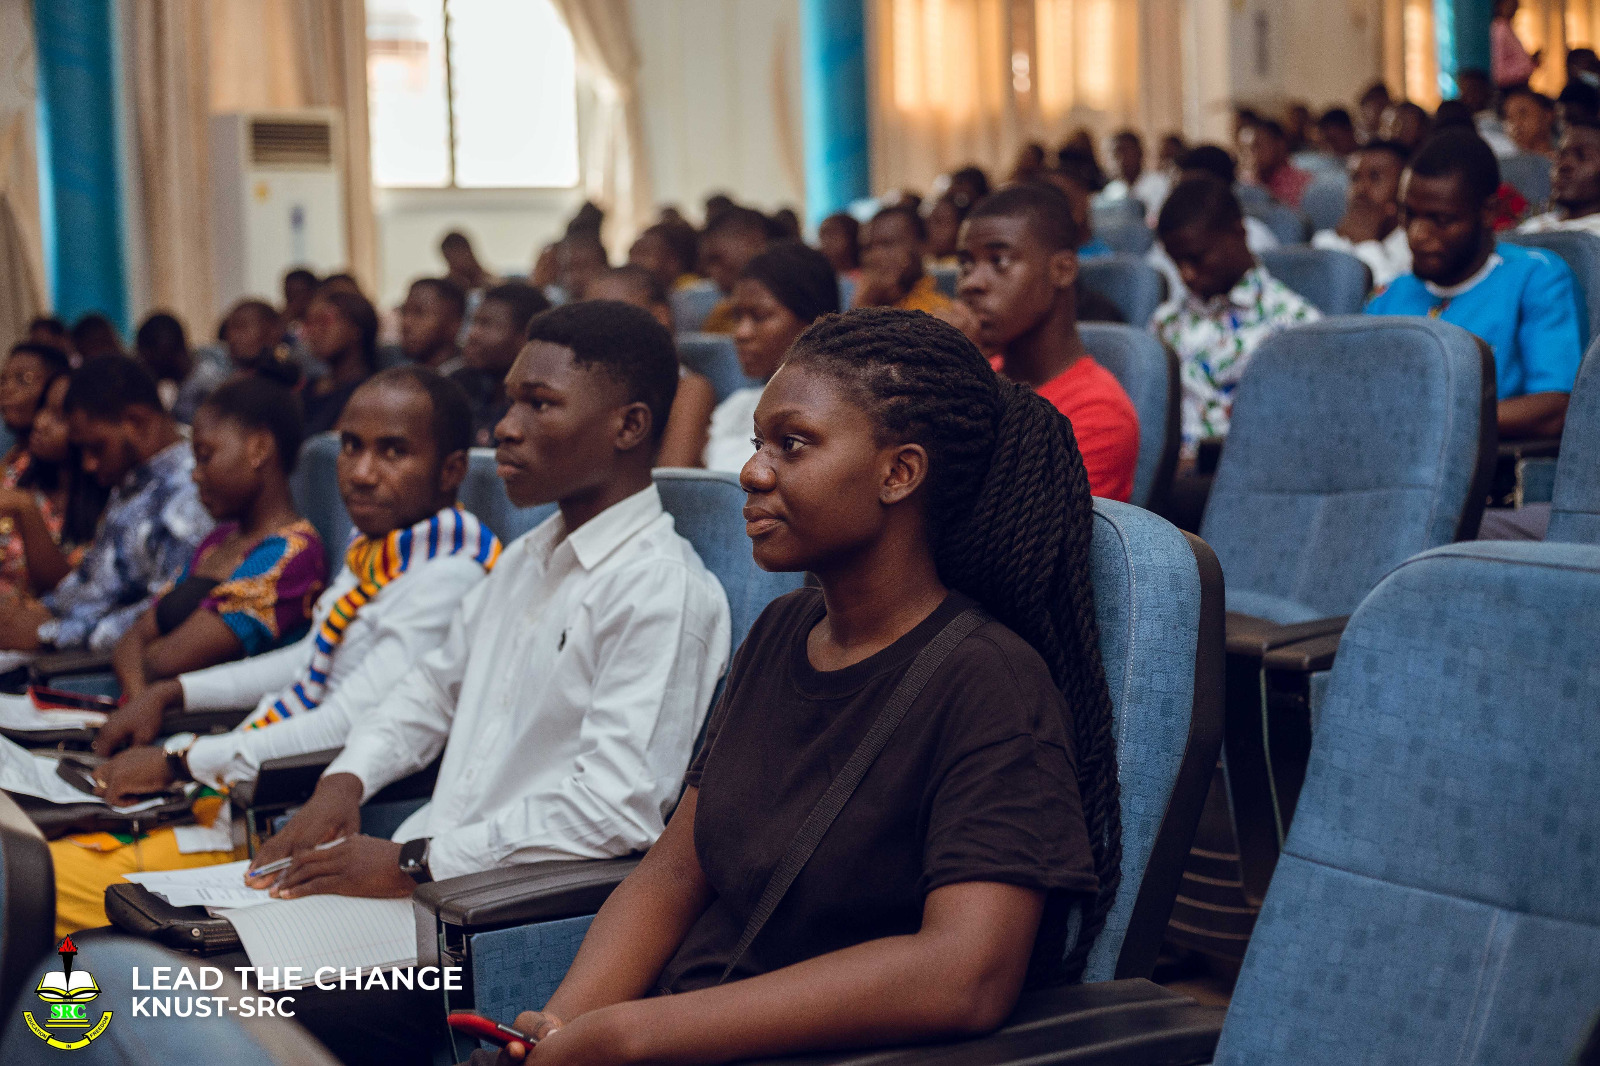 Lead the Change at the KNUST Science Auditorium